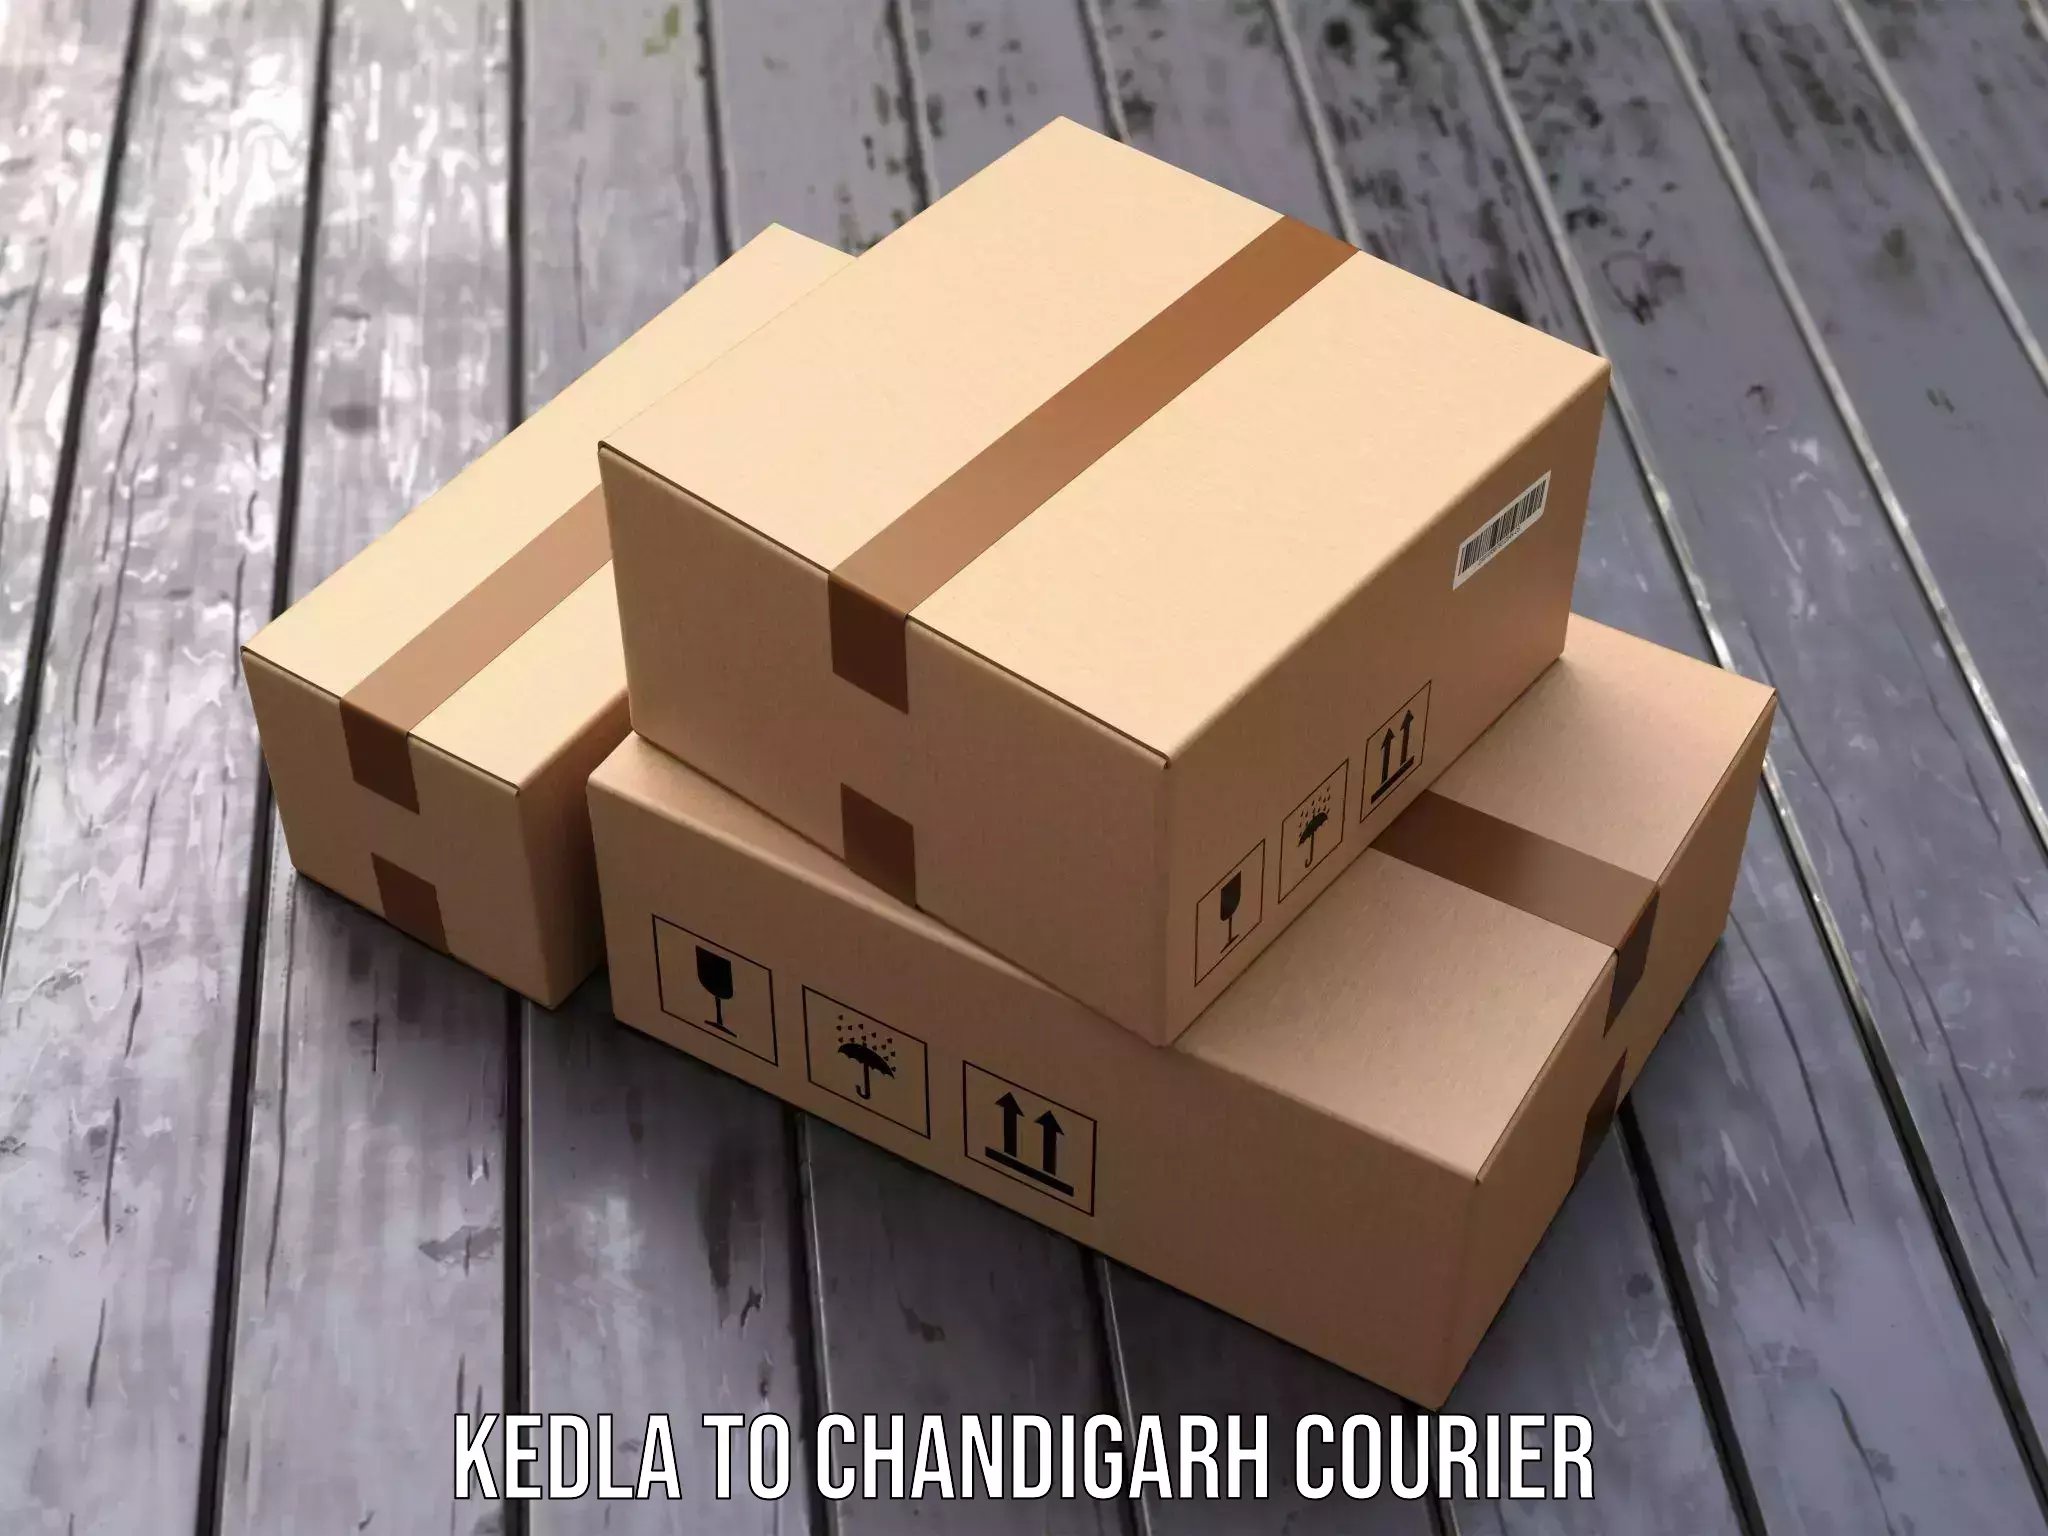 Multi-service courier options Kedla to Chandigarh